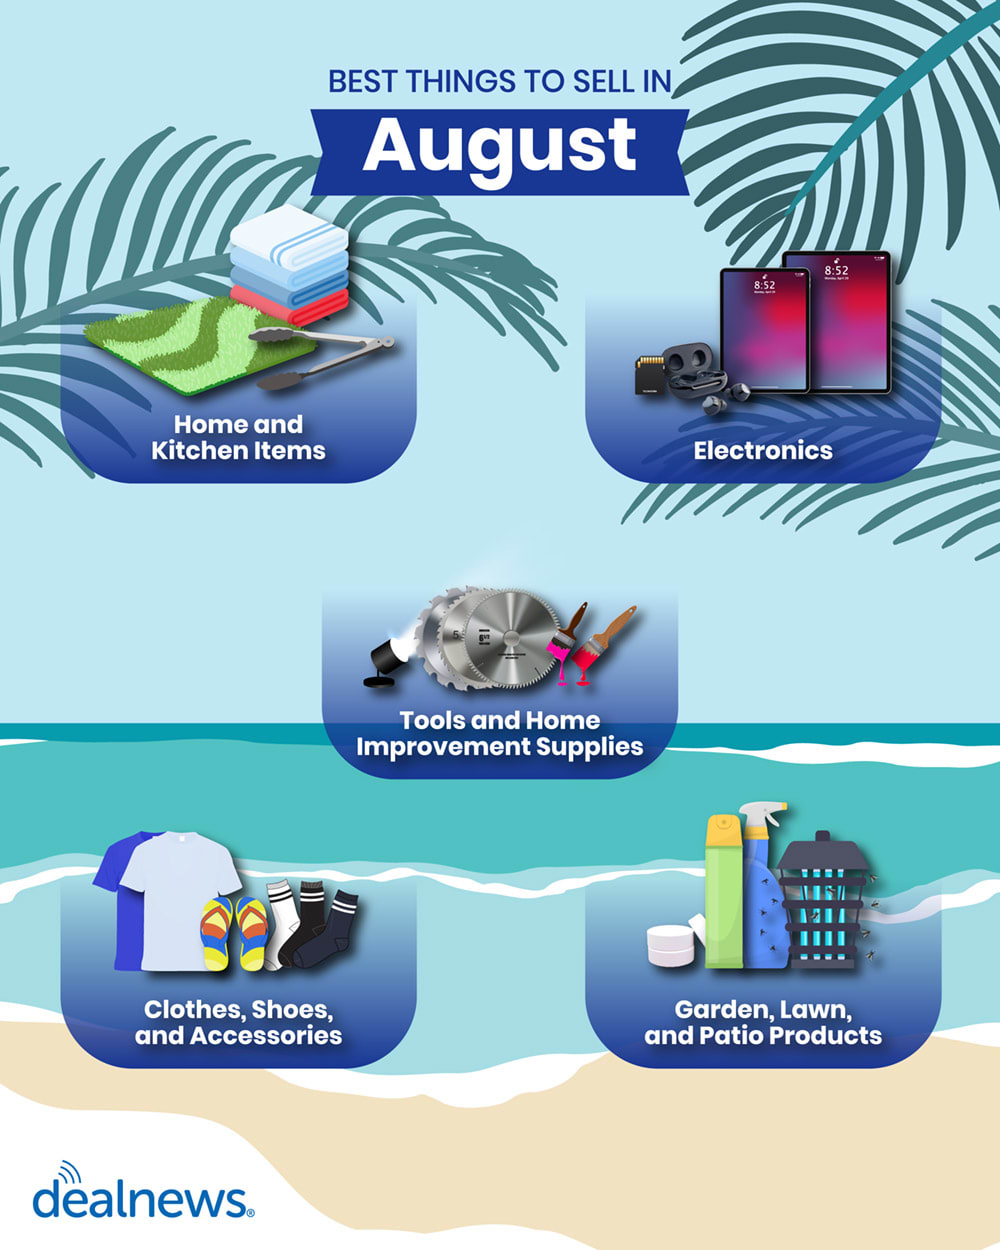 Five of the best things to sell in August shown in infographic.